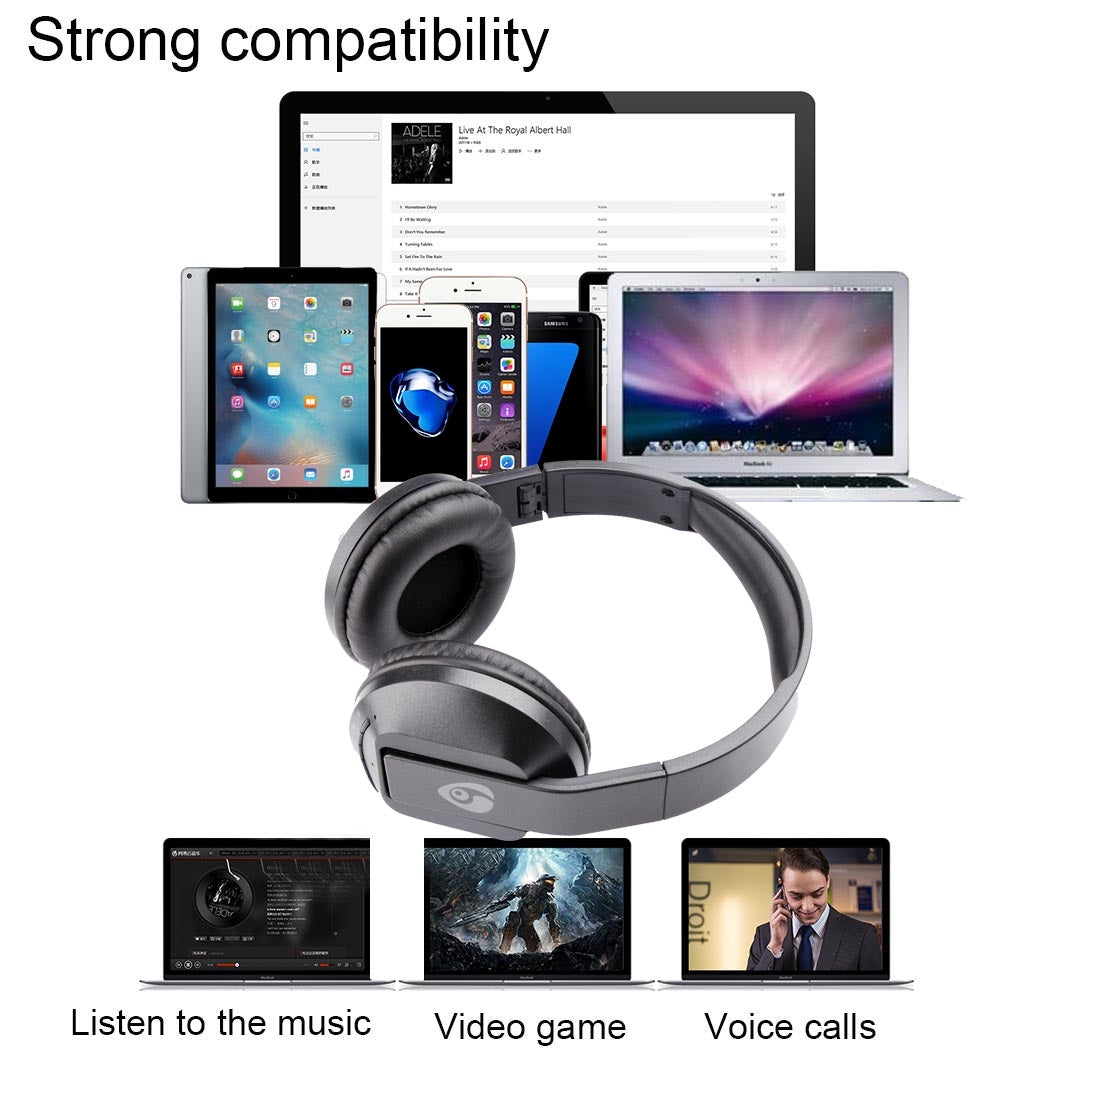 OVLENG S77 Headband Universal Folding Bluetooth Headset with Handsfree Call Function , for iPhone / Samsung / LG / HTC / Nokia / Blackberry Mobile Phone(Black)